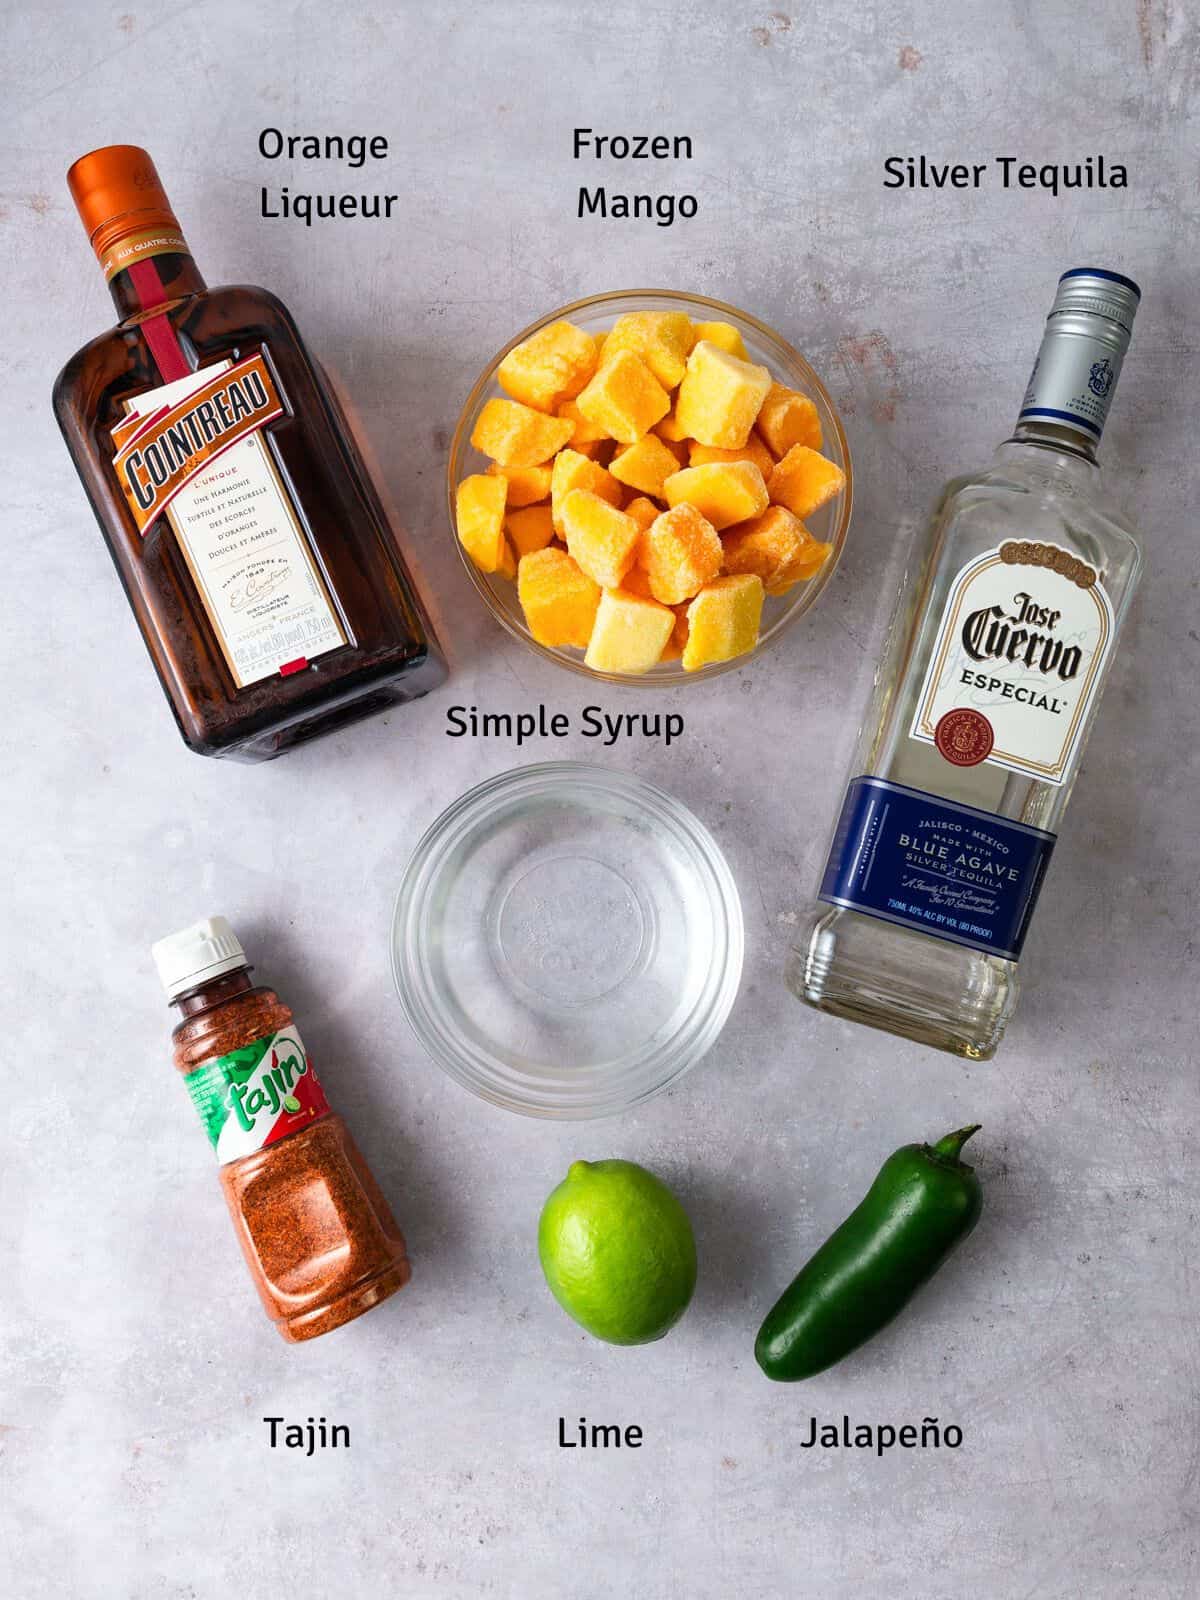 Ingredients for spicy mango margarita, including silver tequila, lime and tajin.